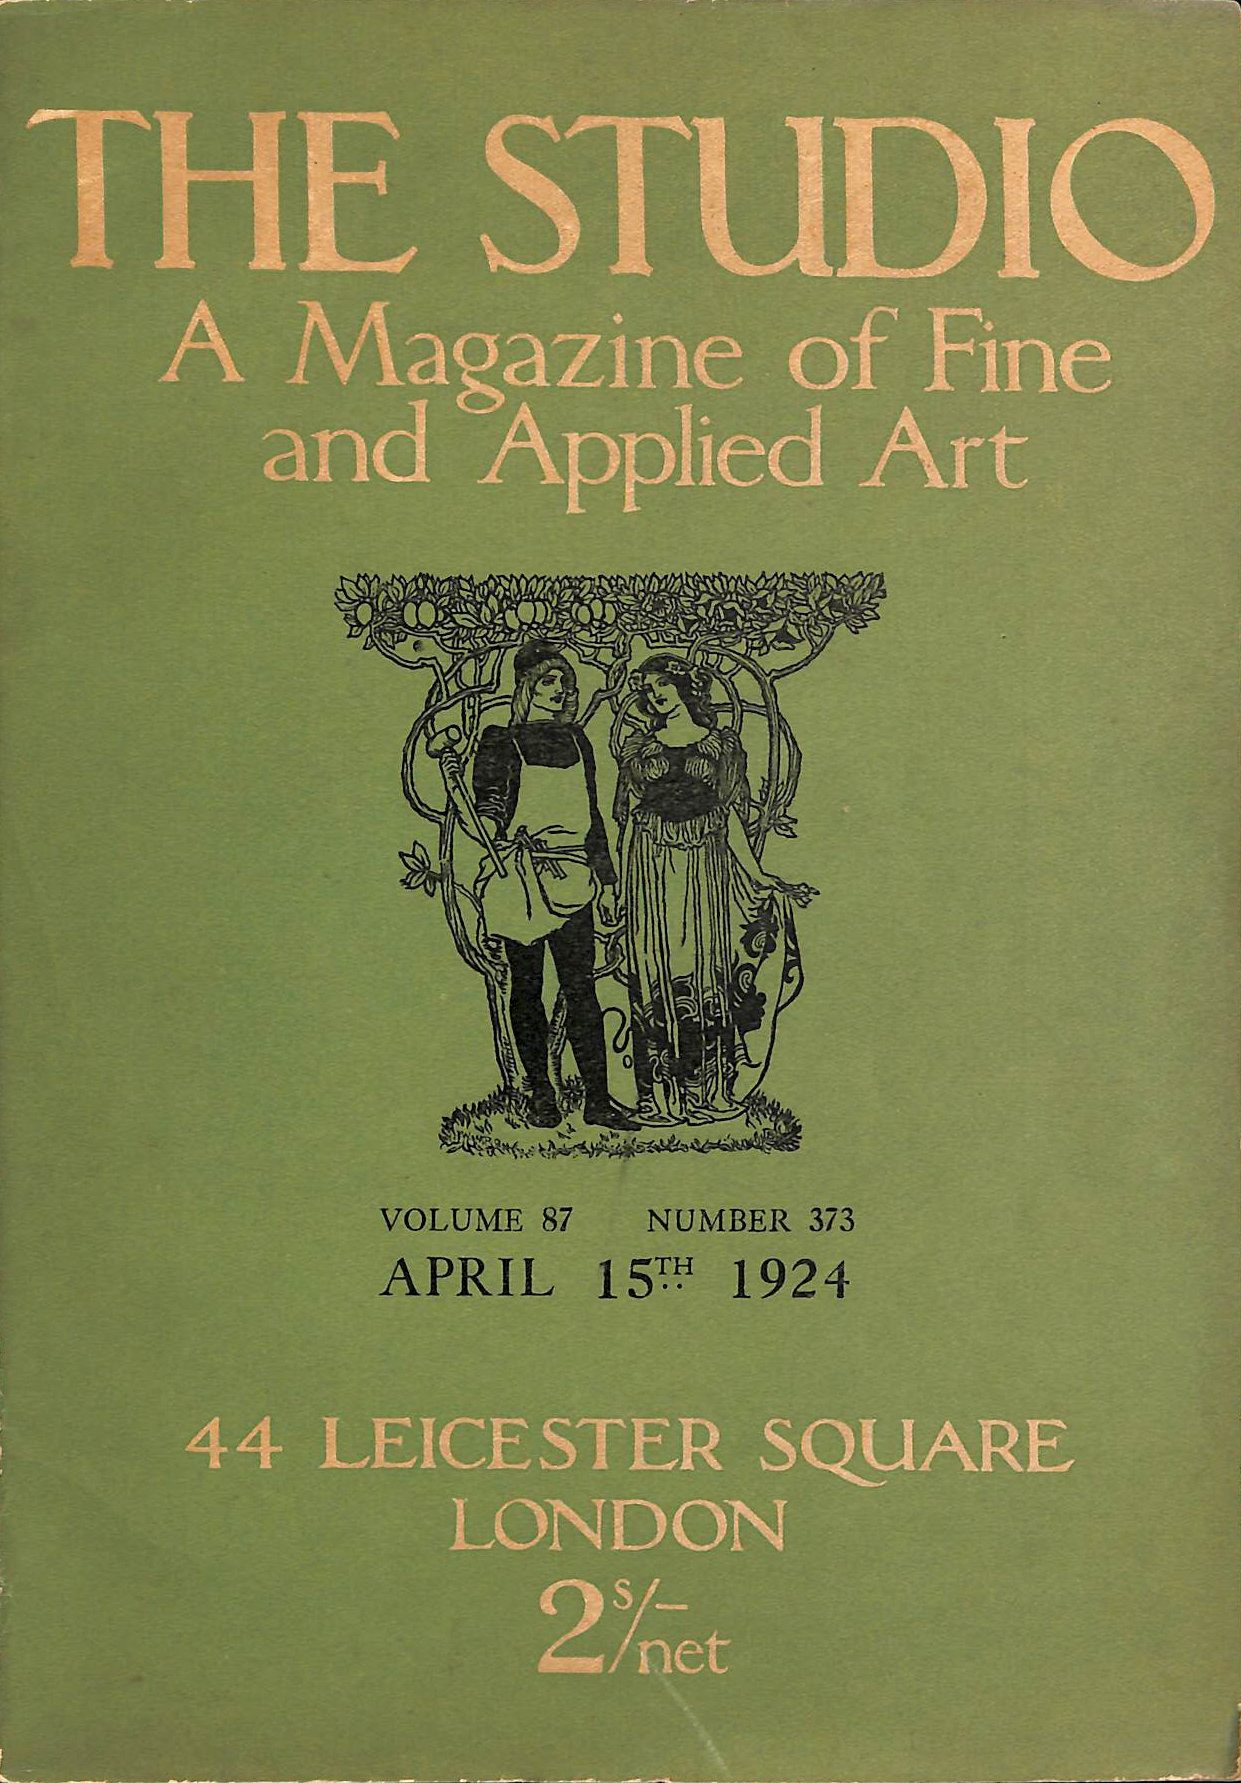 VARIOUS - The Studio, A Magazine of Fine and Applied Art, Volume 87 Number 373, Apr. 15th 1924